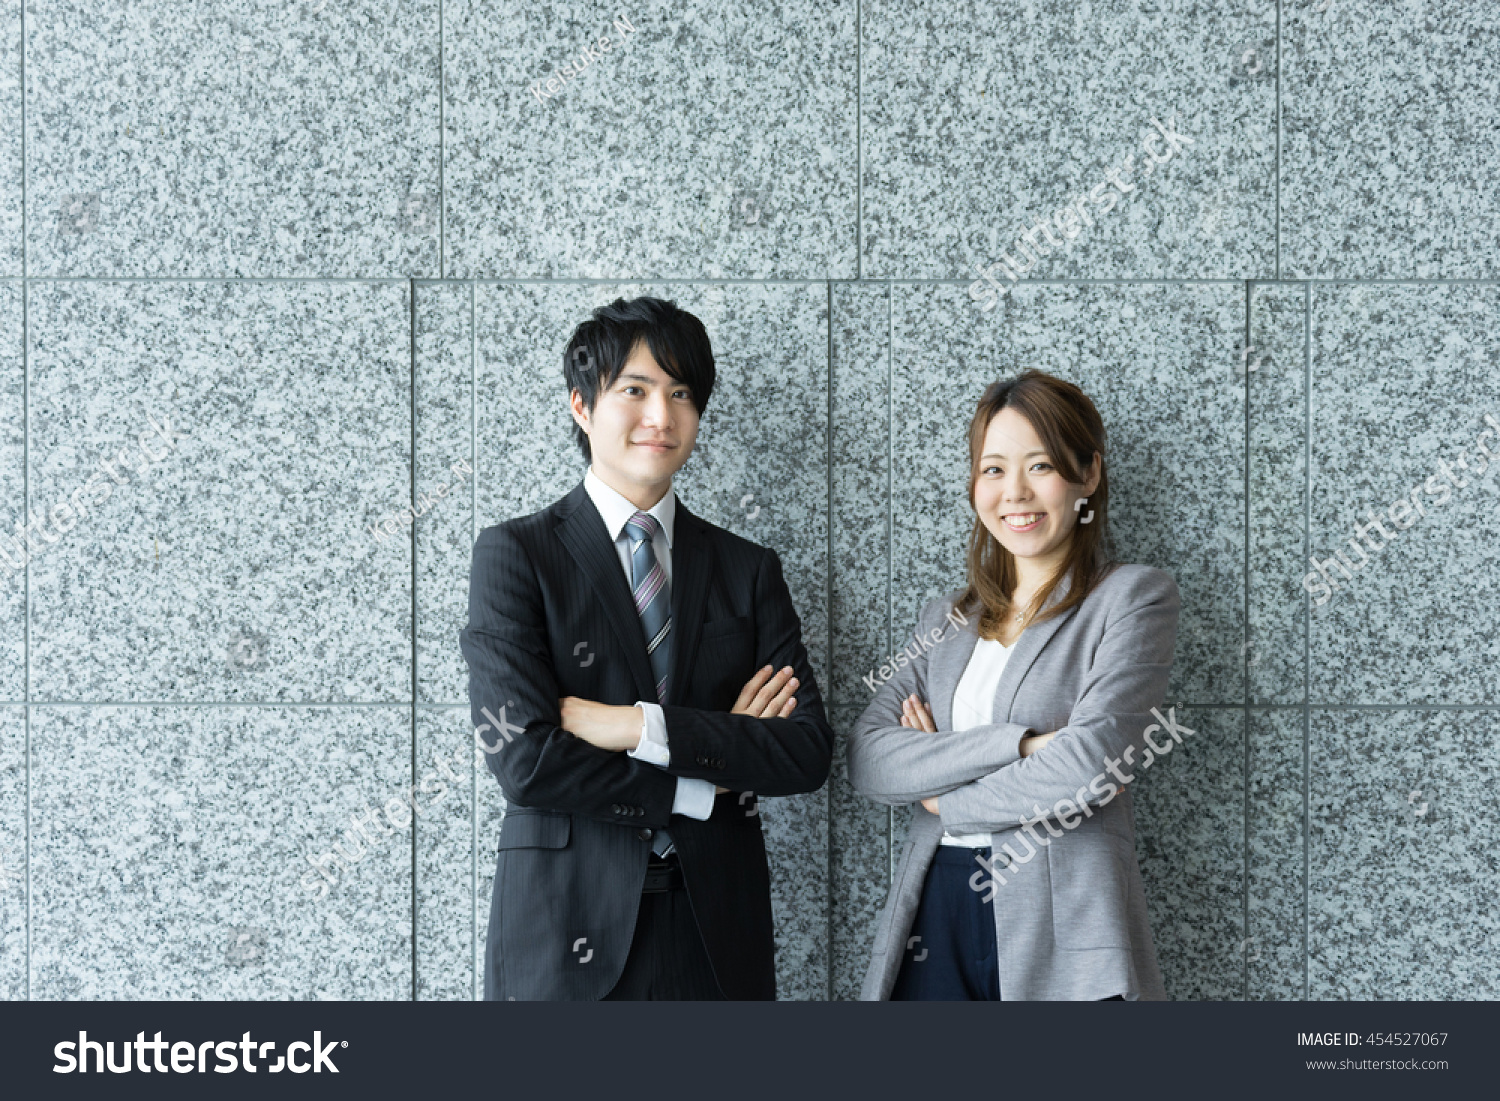 Men and women to be his arms folded with a smile (business image) #454527067